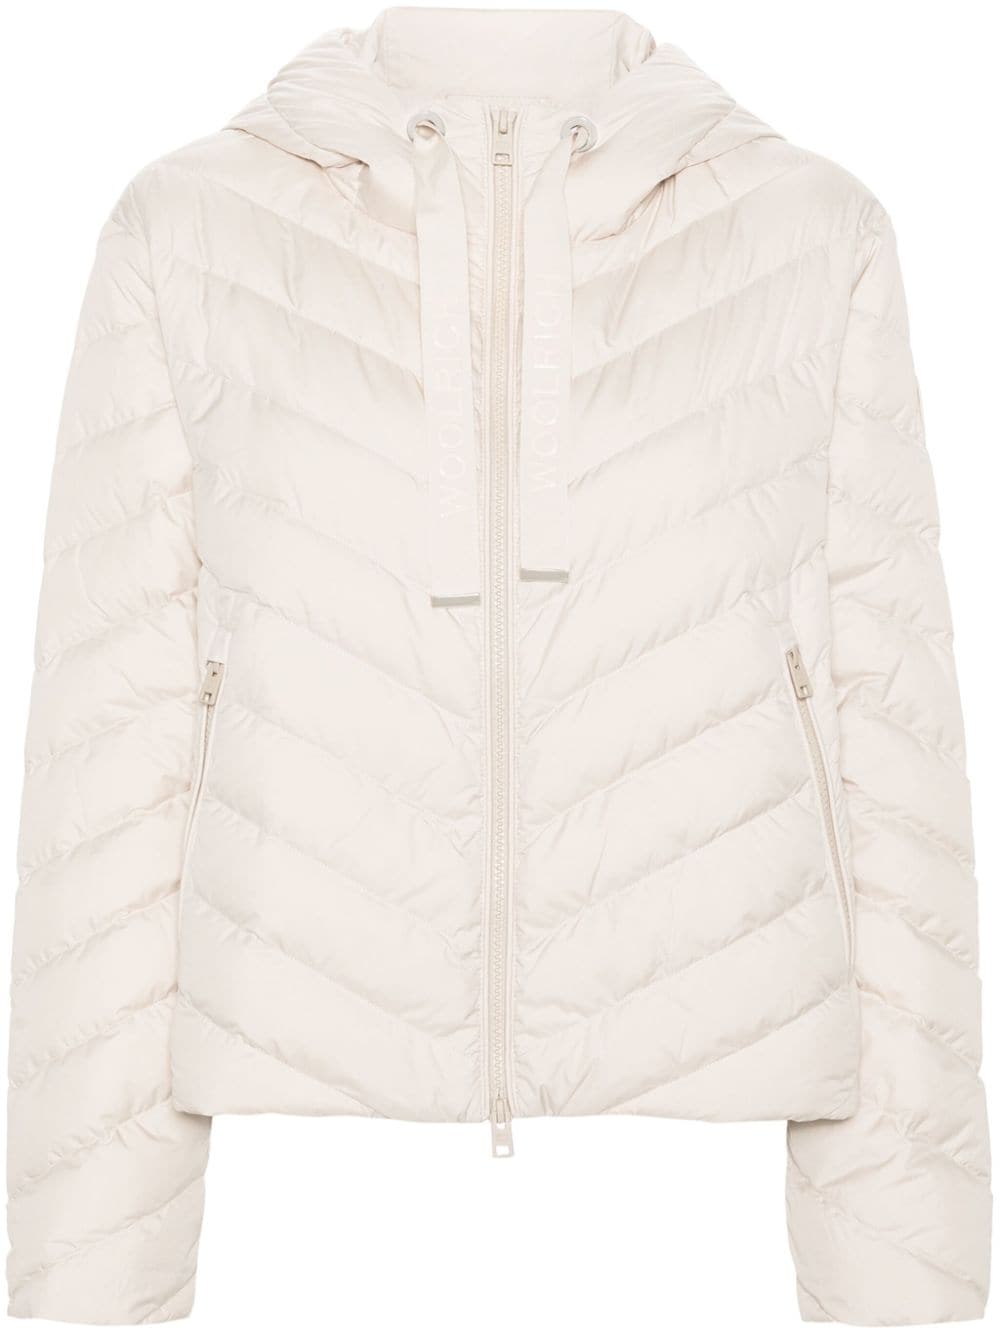 Image 1 of Woolrich chevron padded jacket